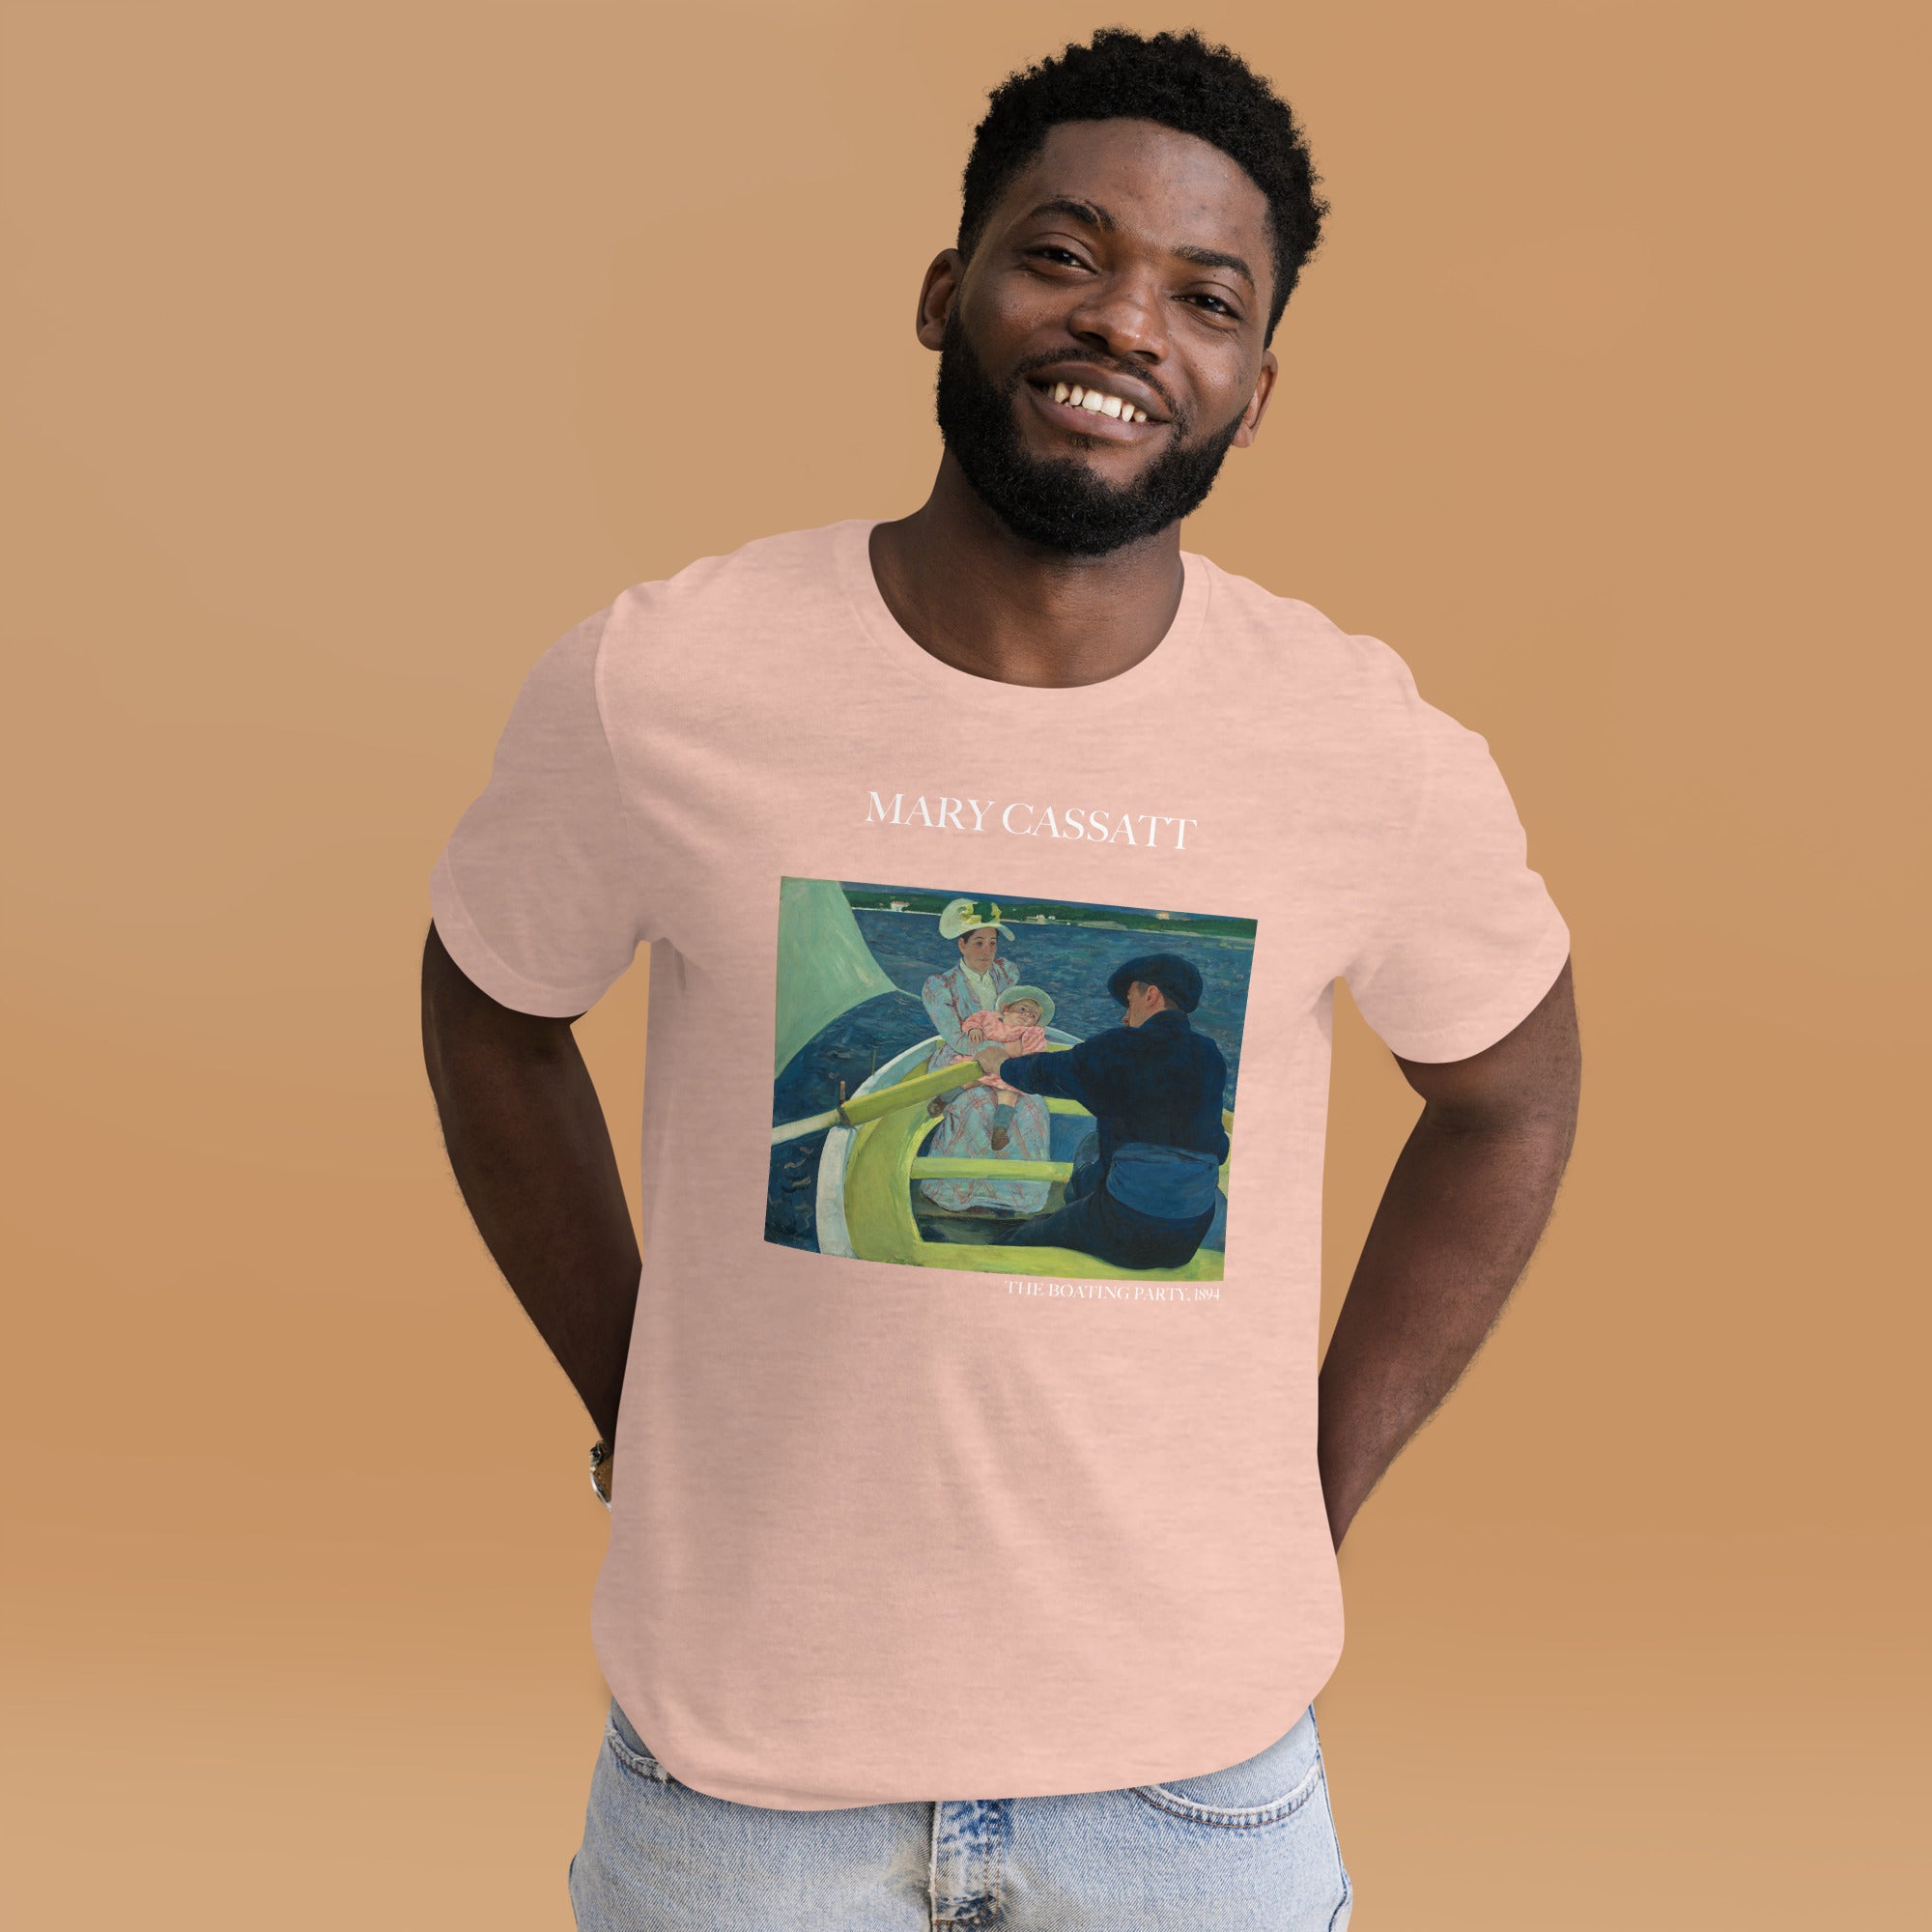 Mary Cassatt 'The Boating Party' Famous Painting T-Shirt | Unisex Classic Art Tee